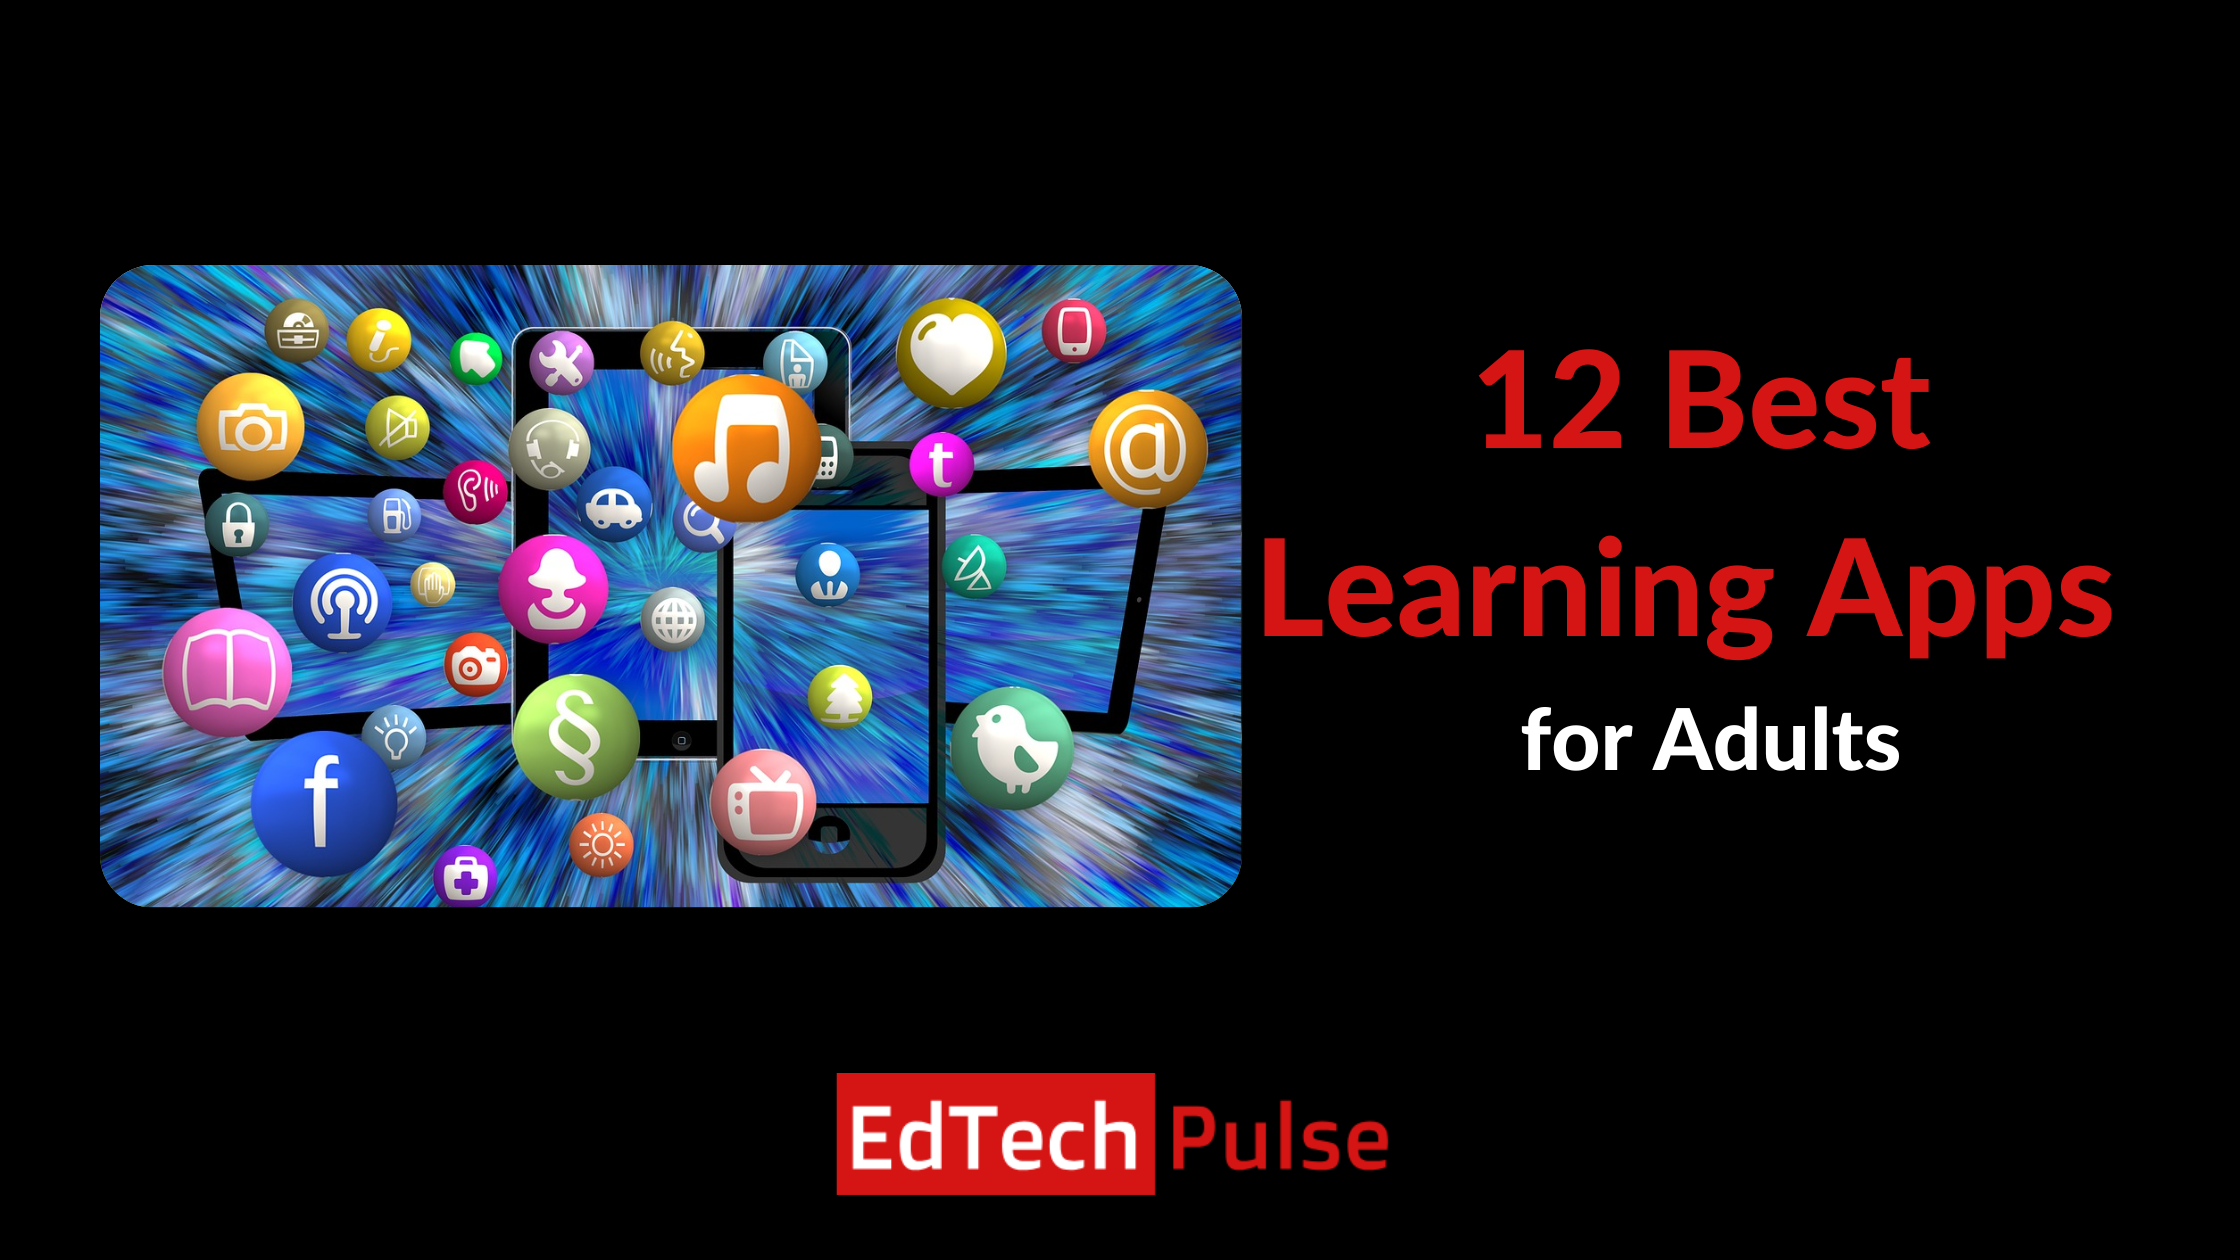 12 Best Learning Apps for Adults